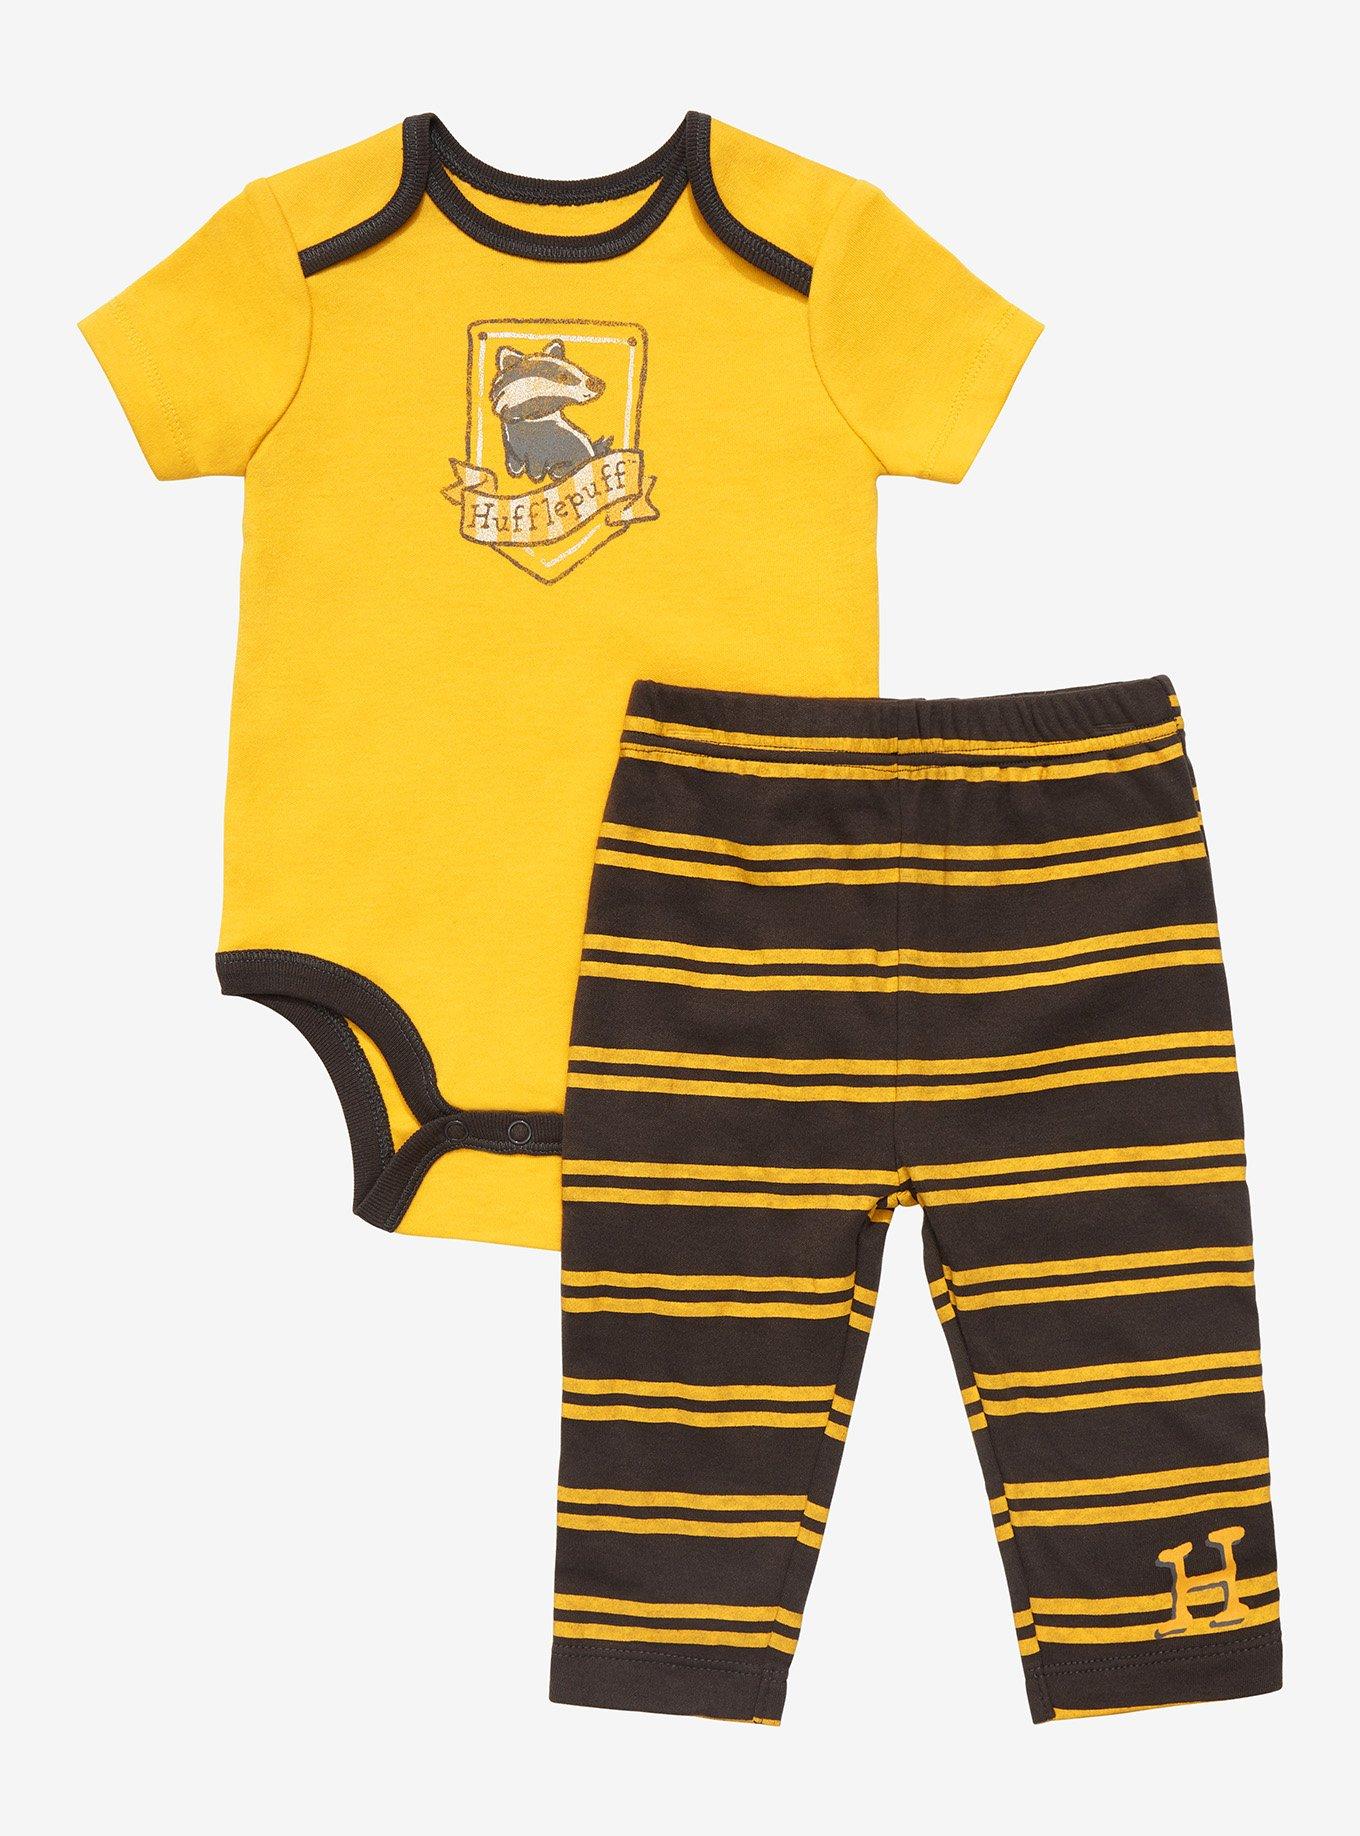 Harry Potter Hufflepuff Crest Leggings Set Exclusive One-Piece | and BoxLunch BoxLunch - Infant